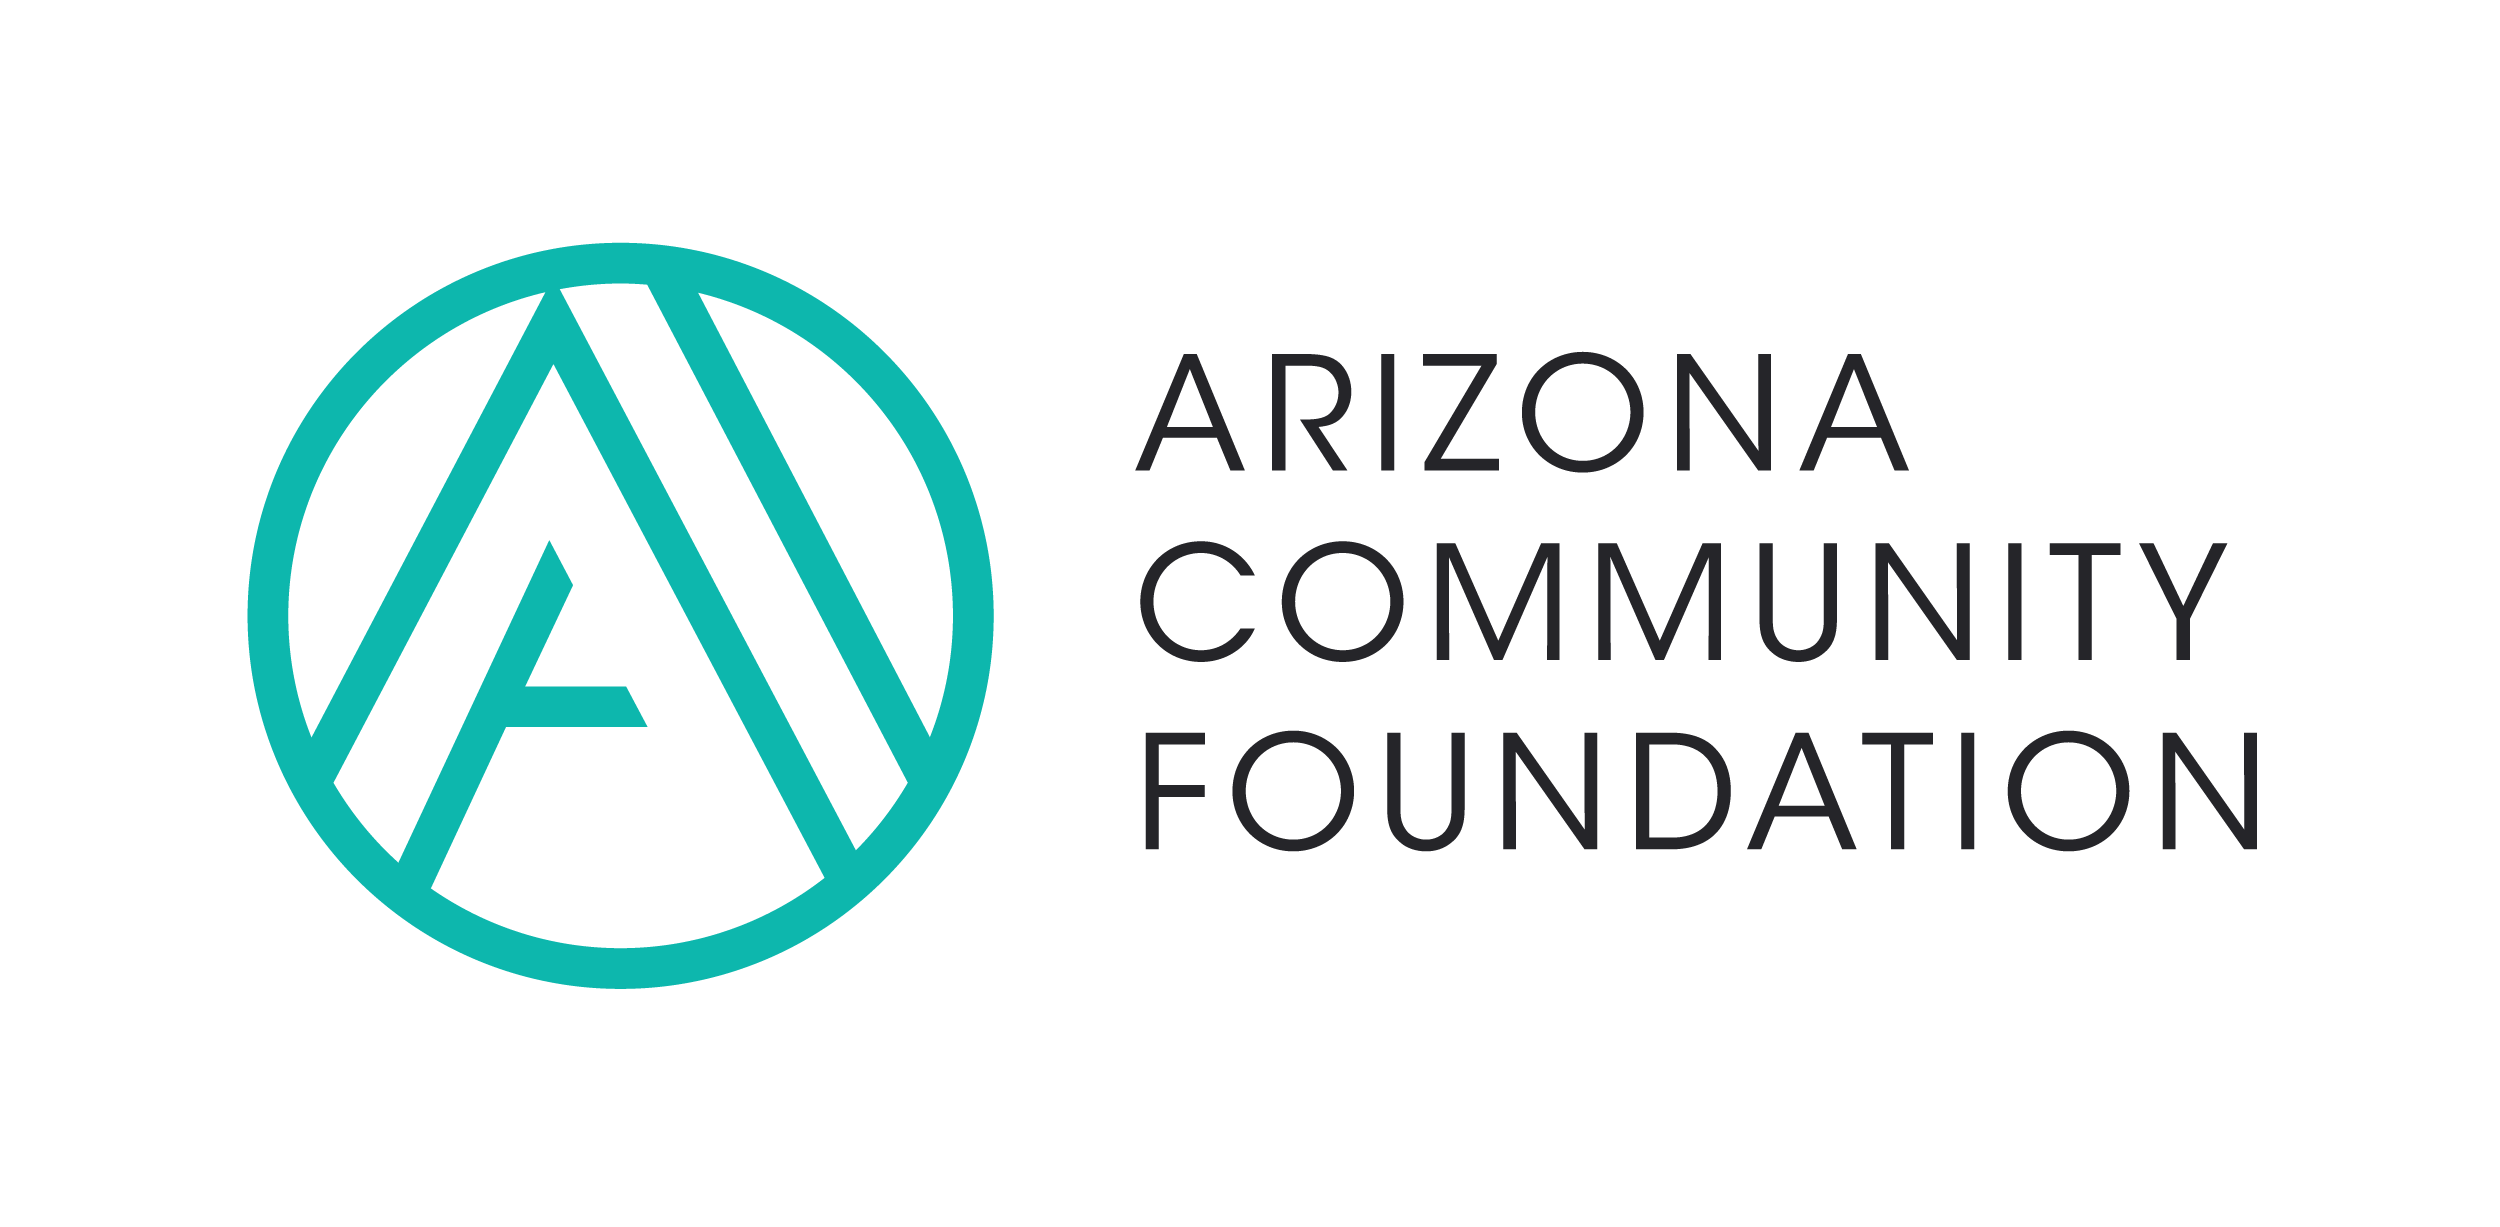 For more information about Arizona Community Foundation - Click Here